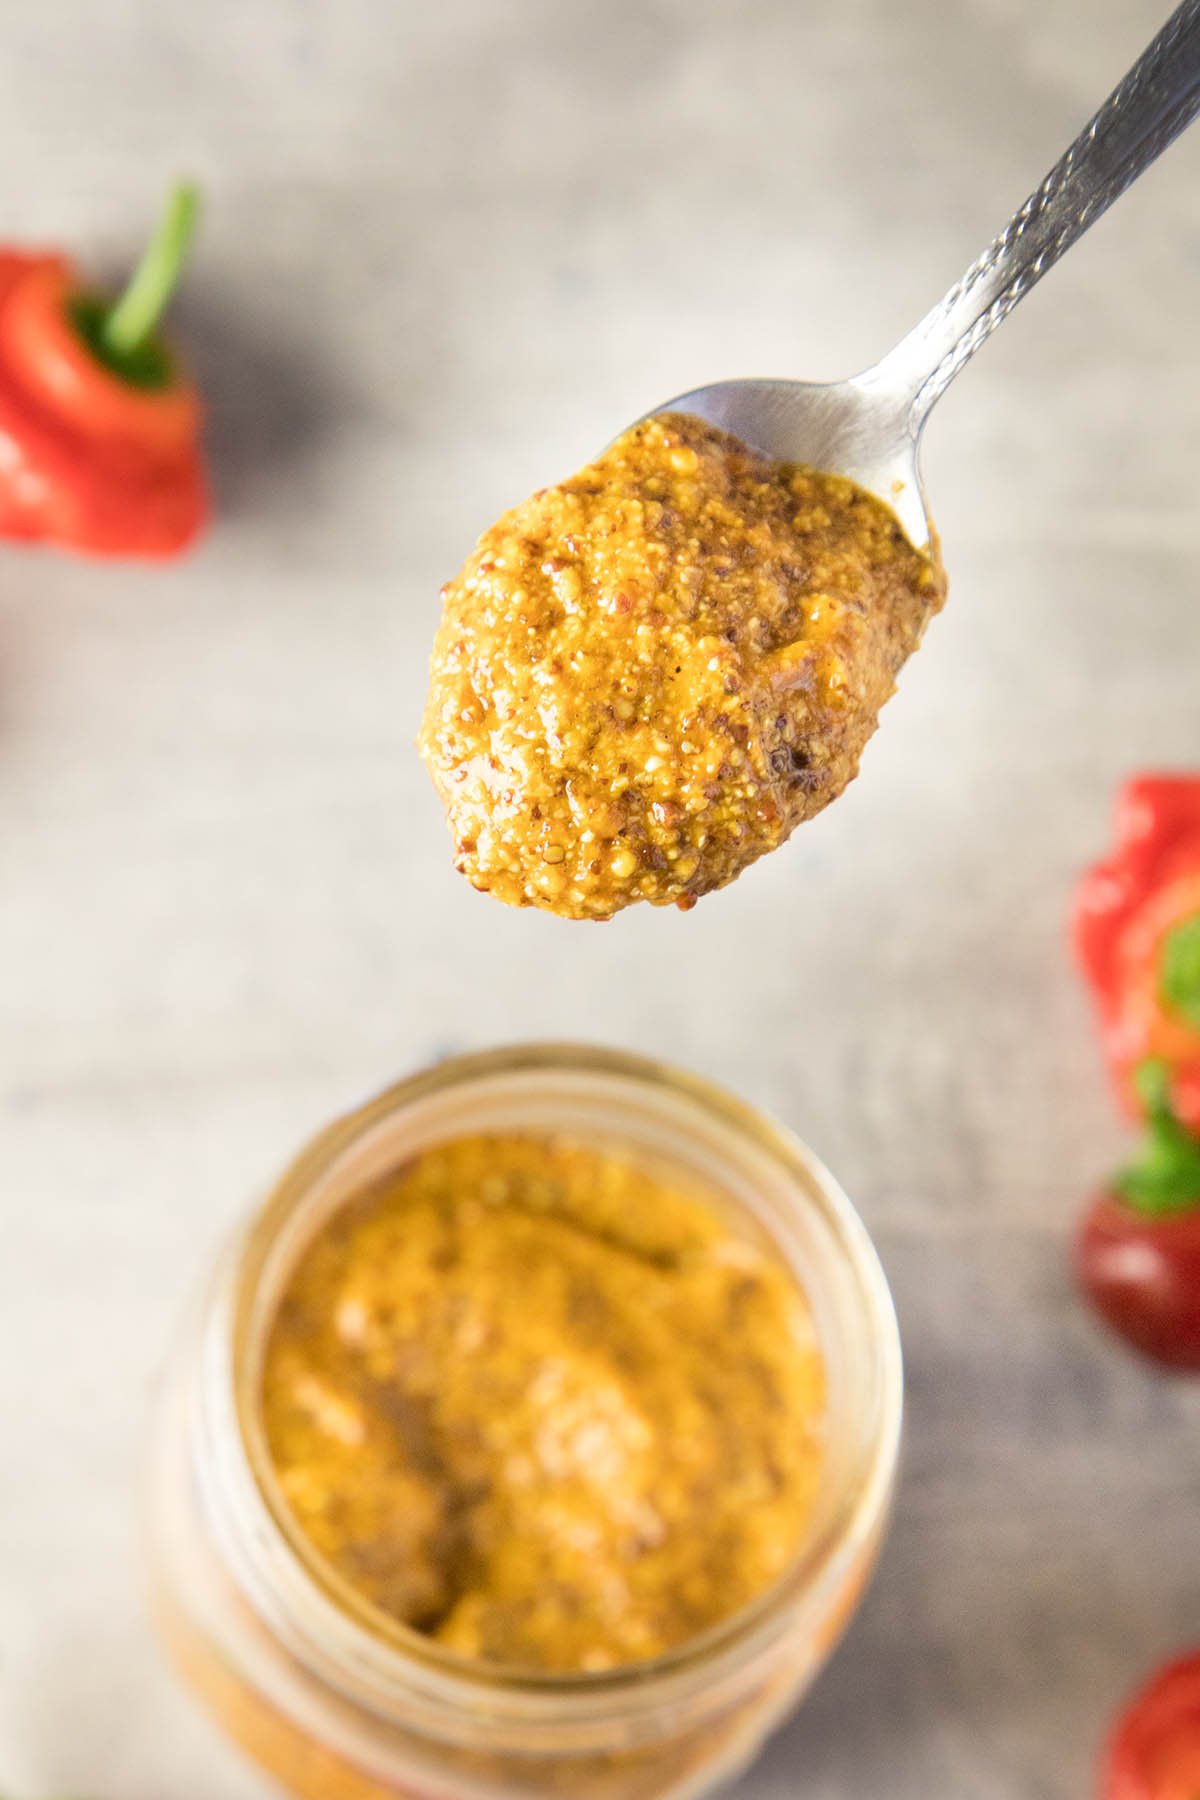 A spoonful of the delicious Homemade Chipotle-Honey Mustard